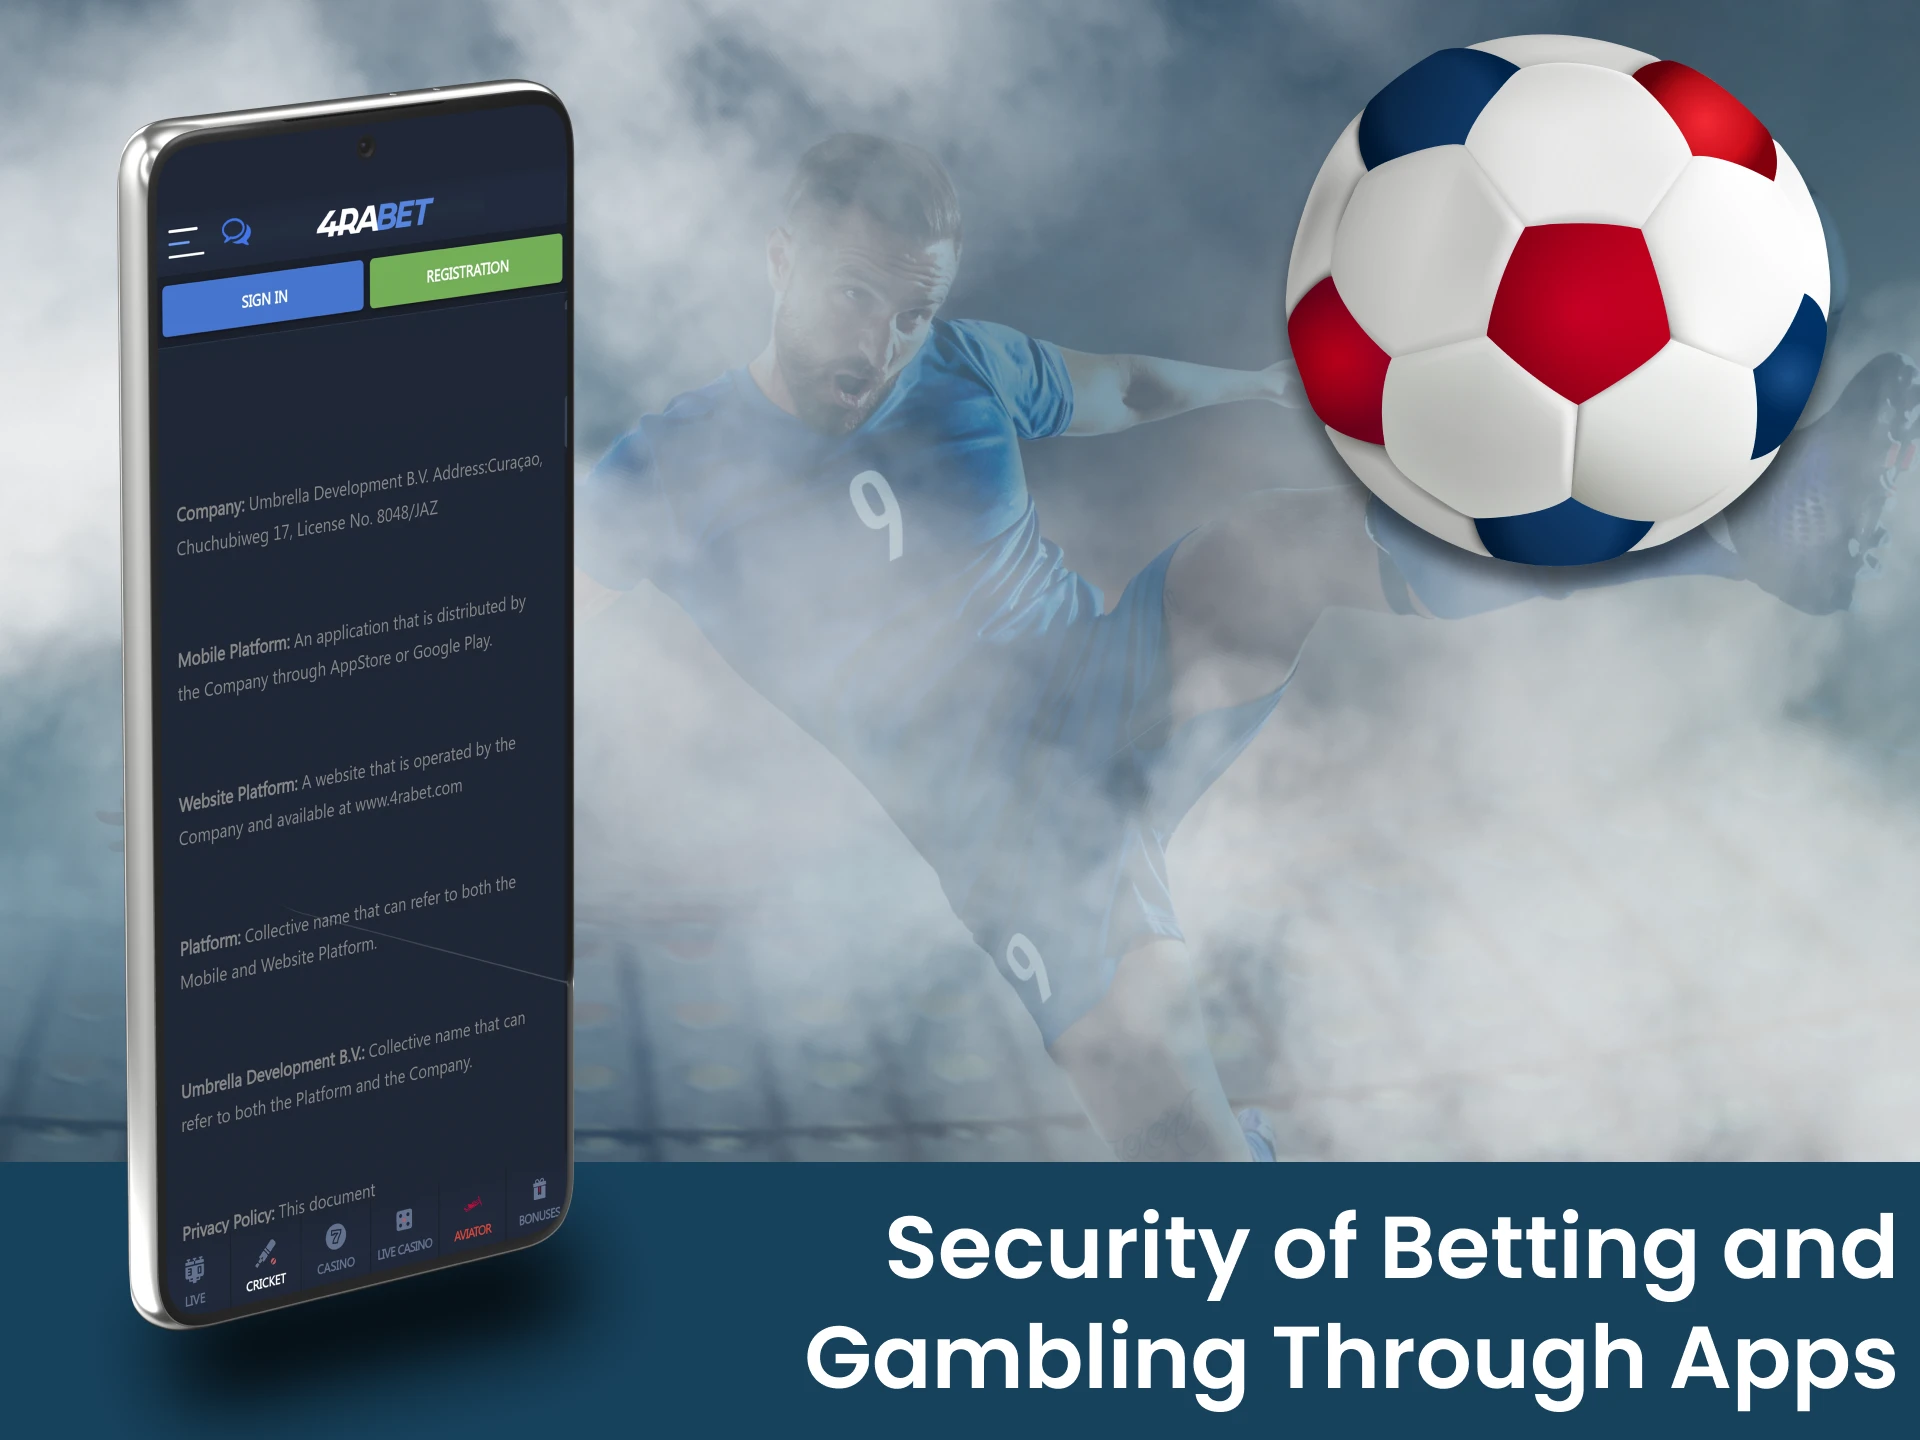 Football betting apps are safe for betting from India.